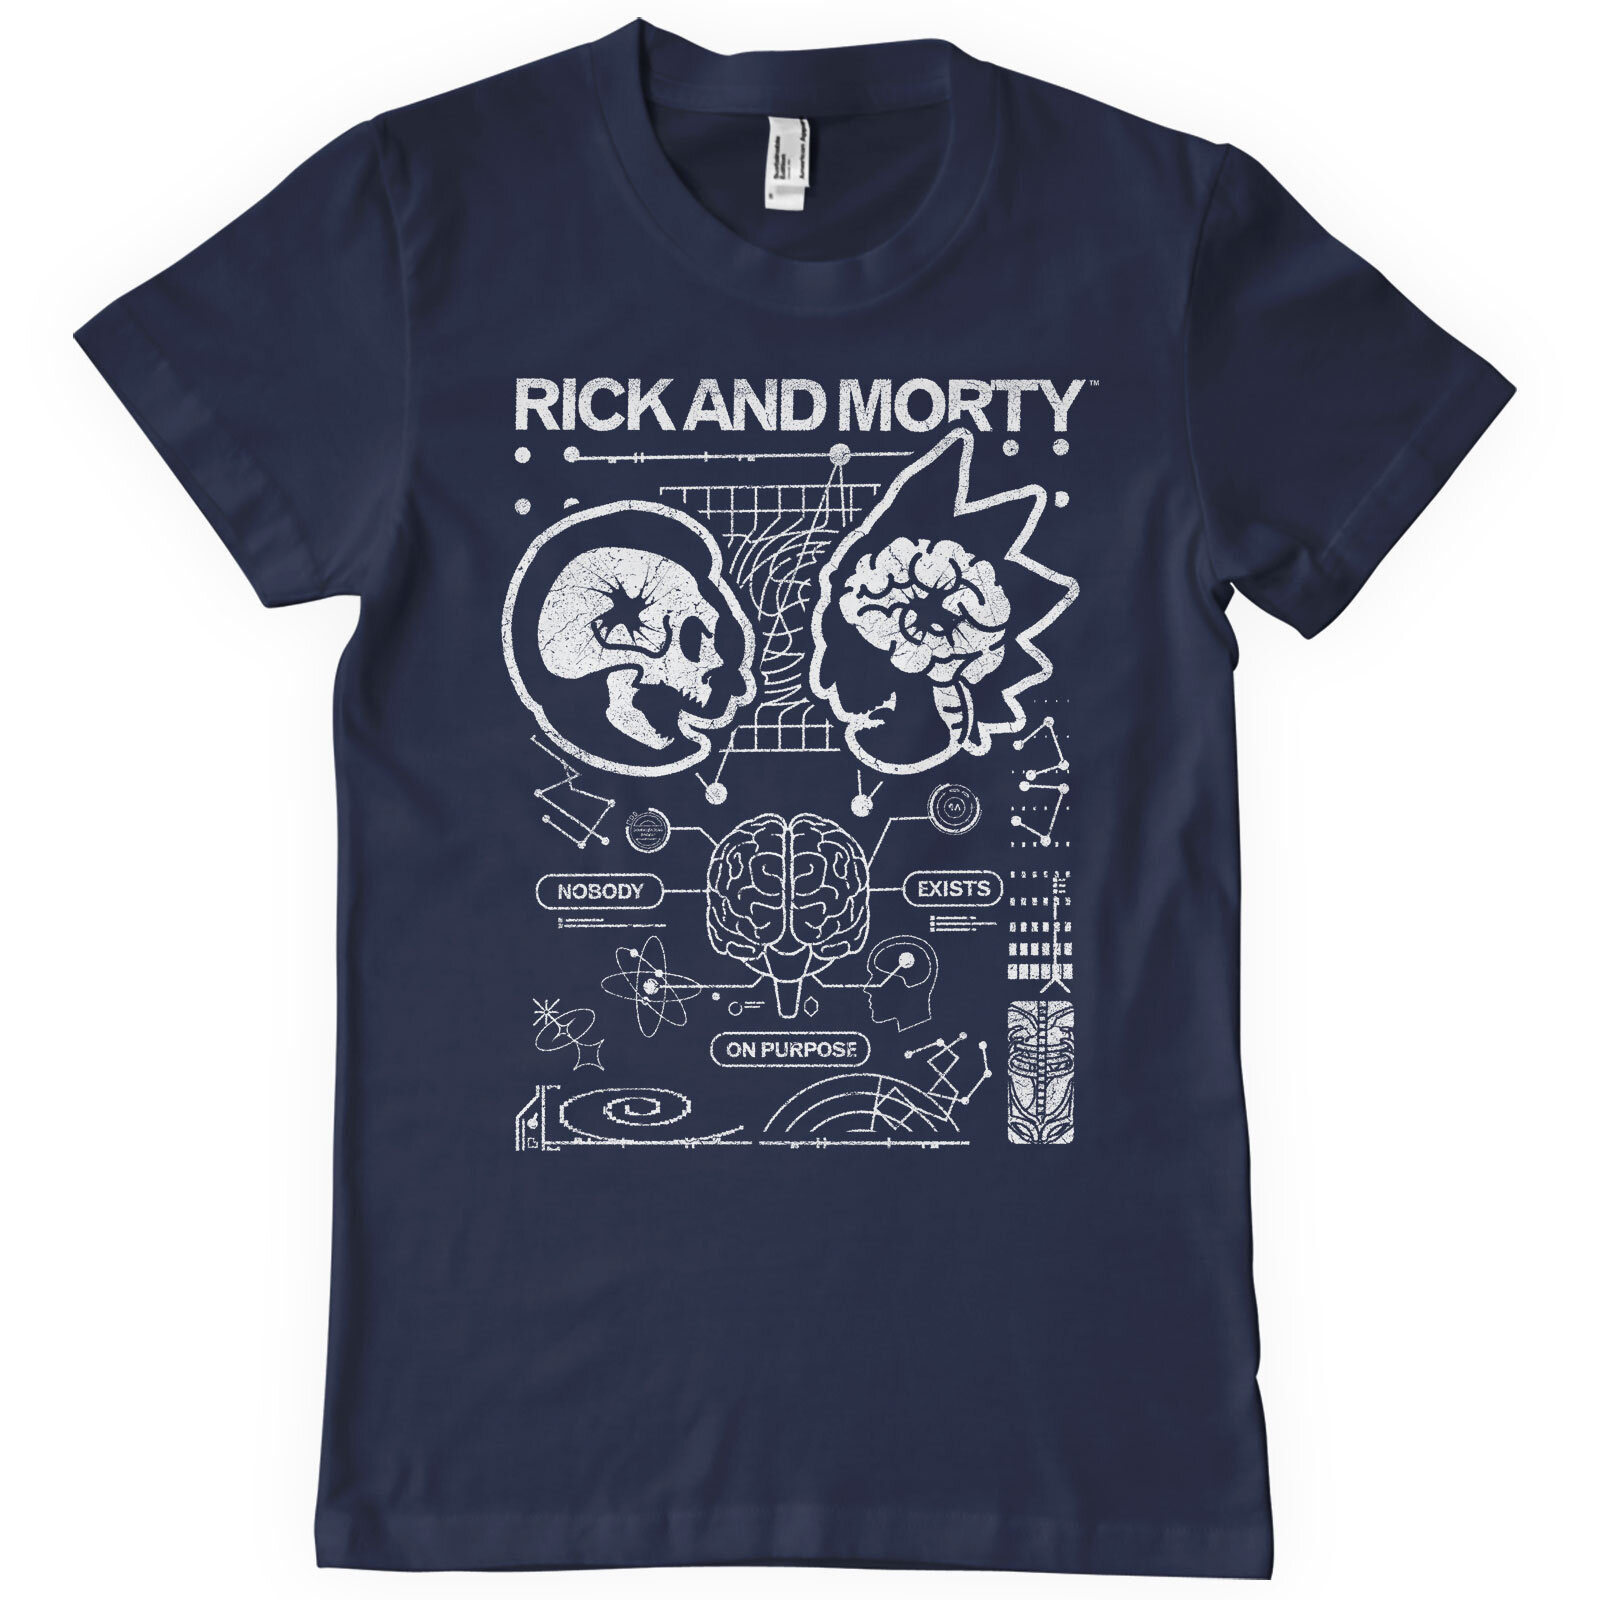 Rick and Morty - Nobody Exists On Purpose T-Shirt